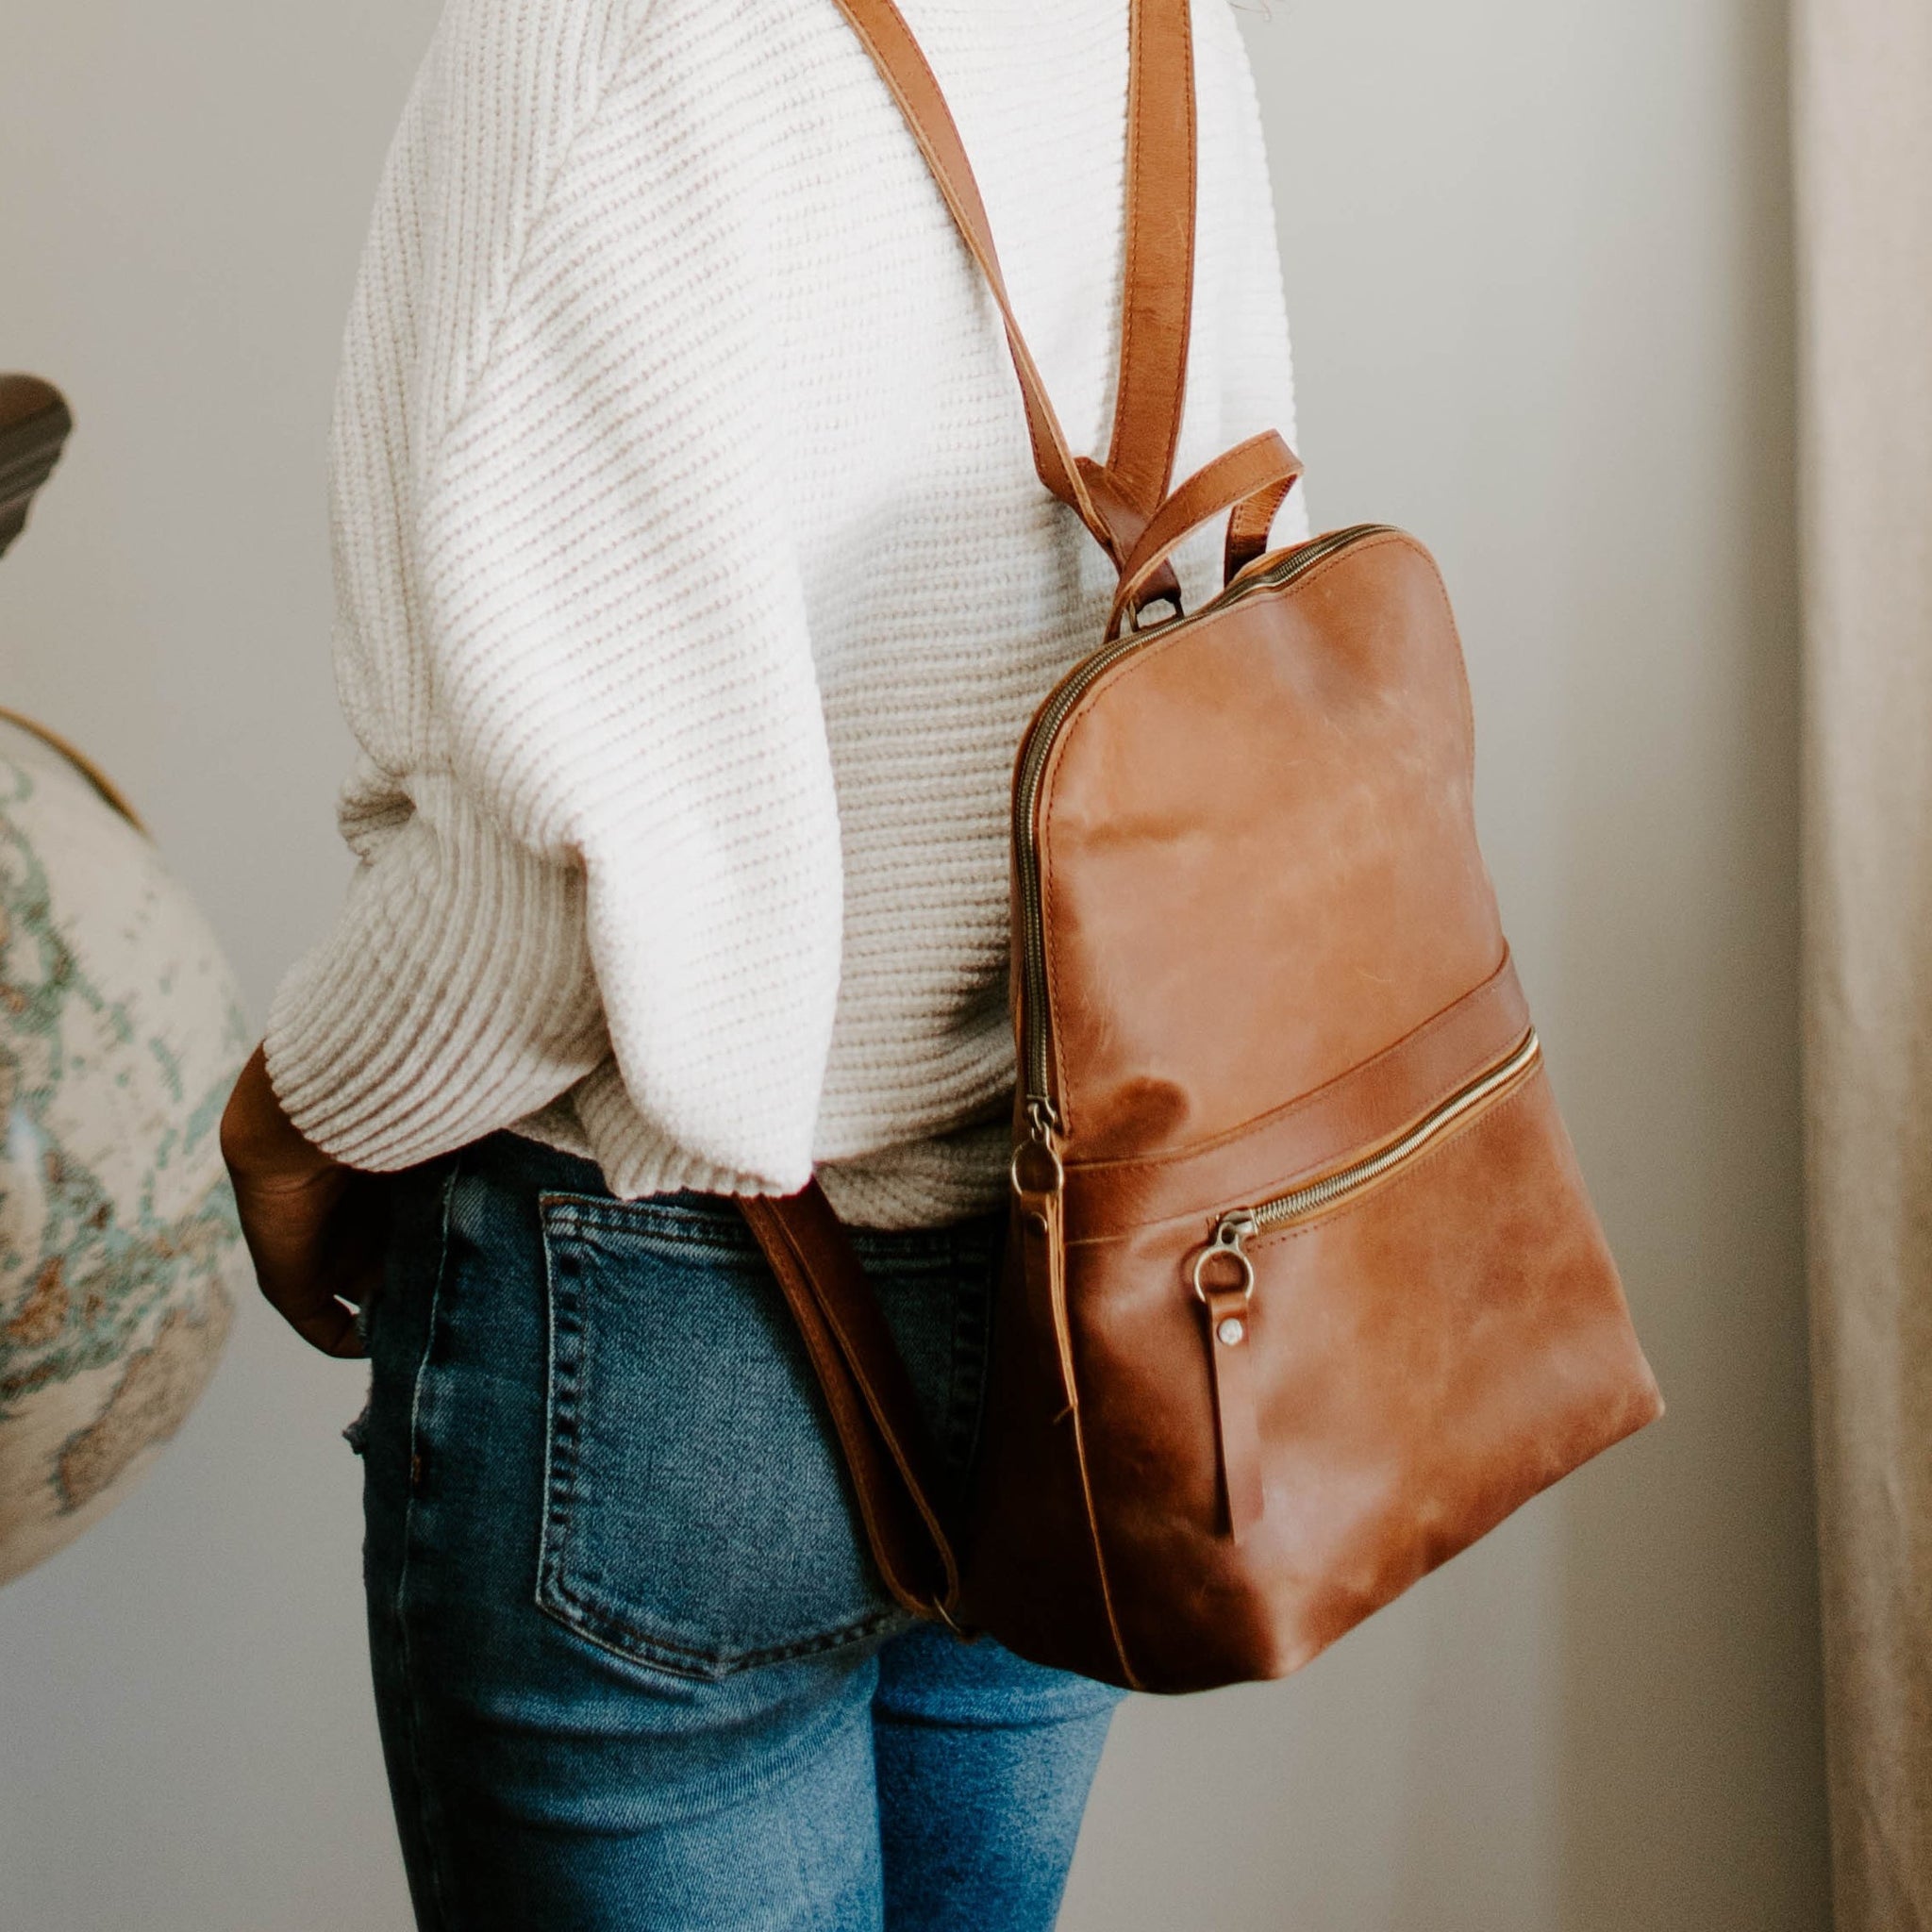 Tote or Backpack for College? – MAHI Leather